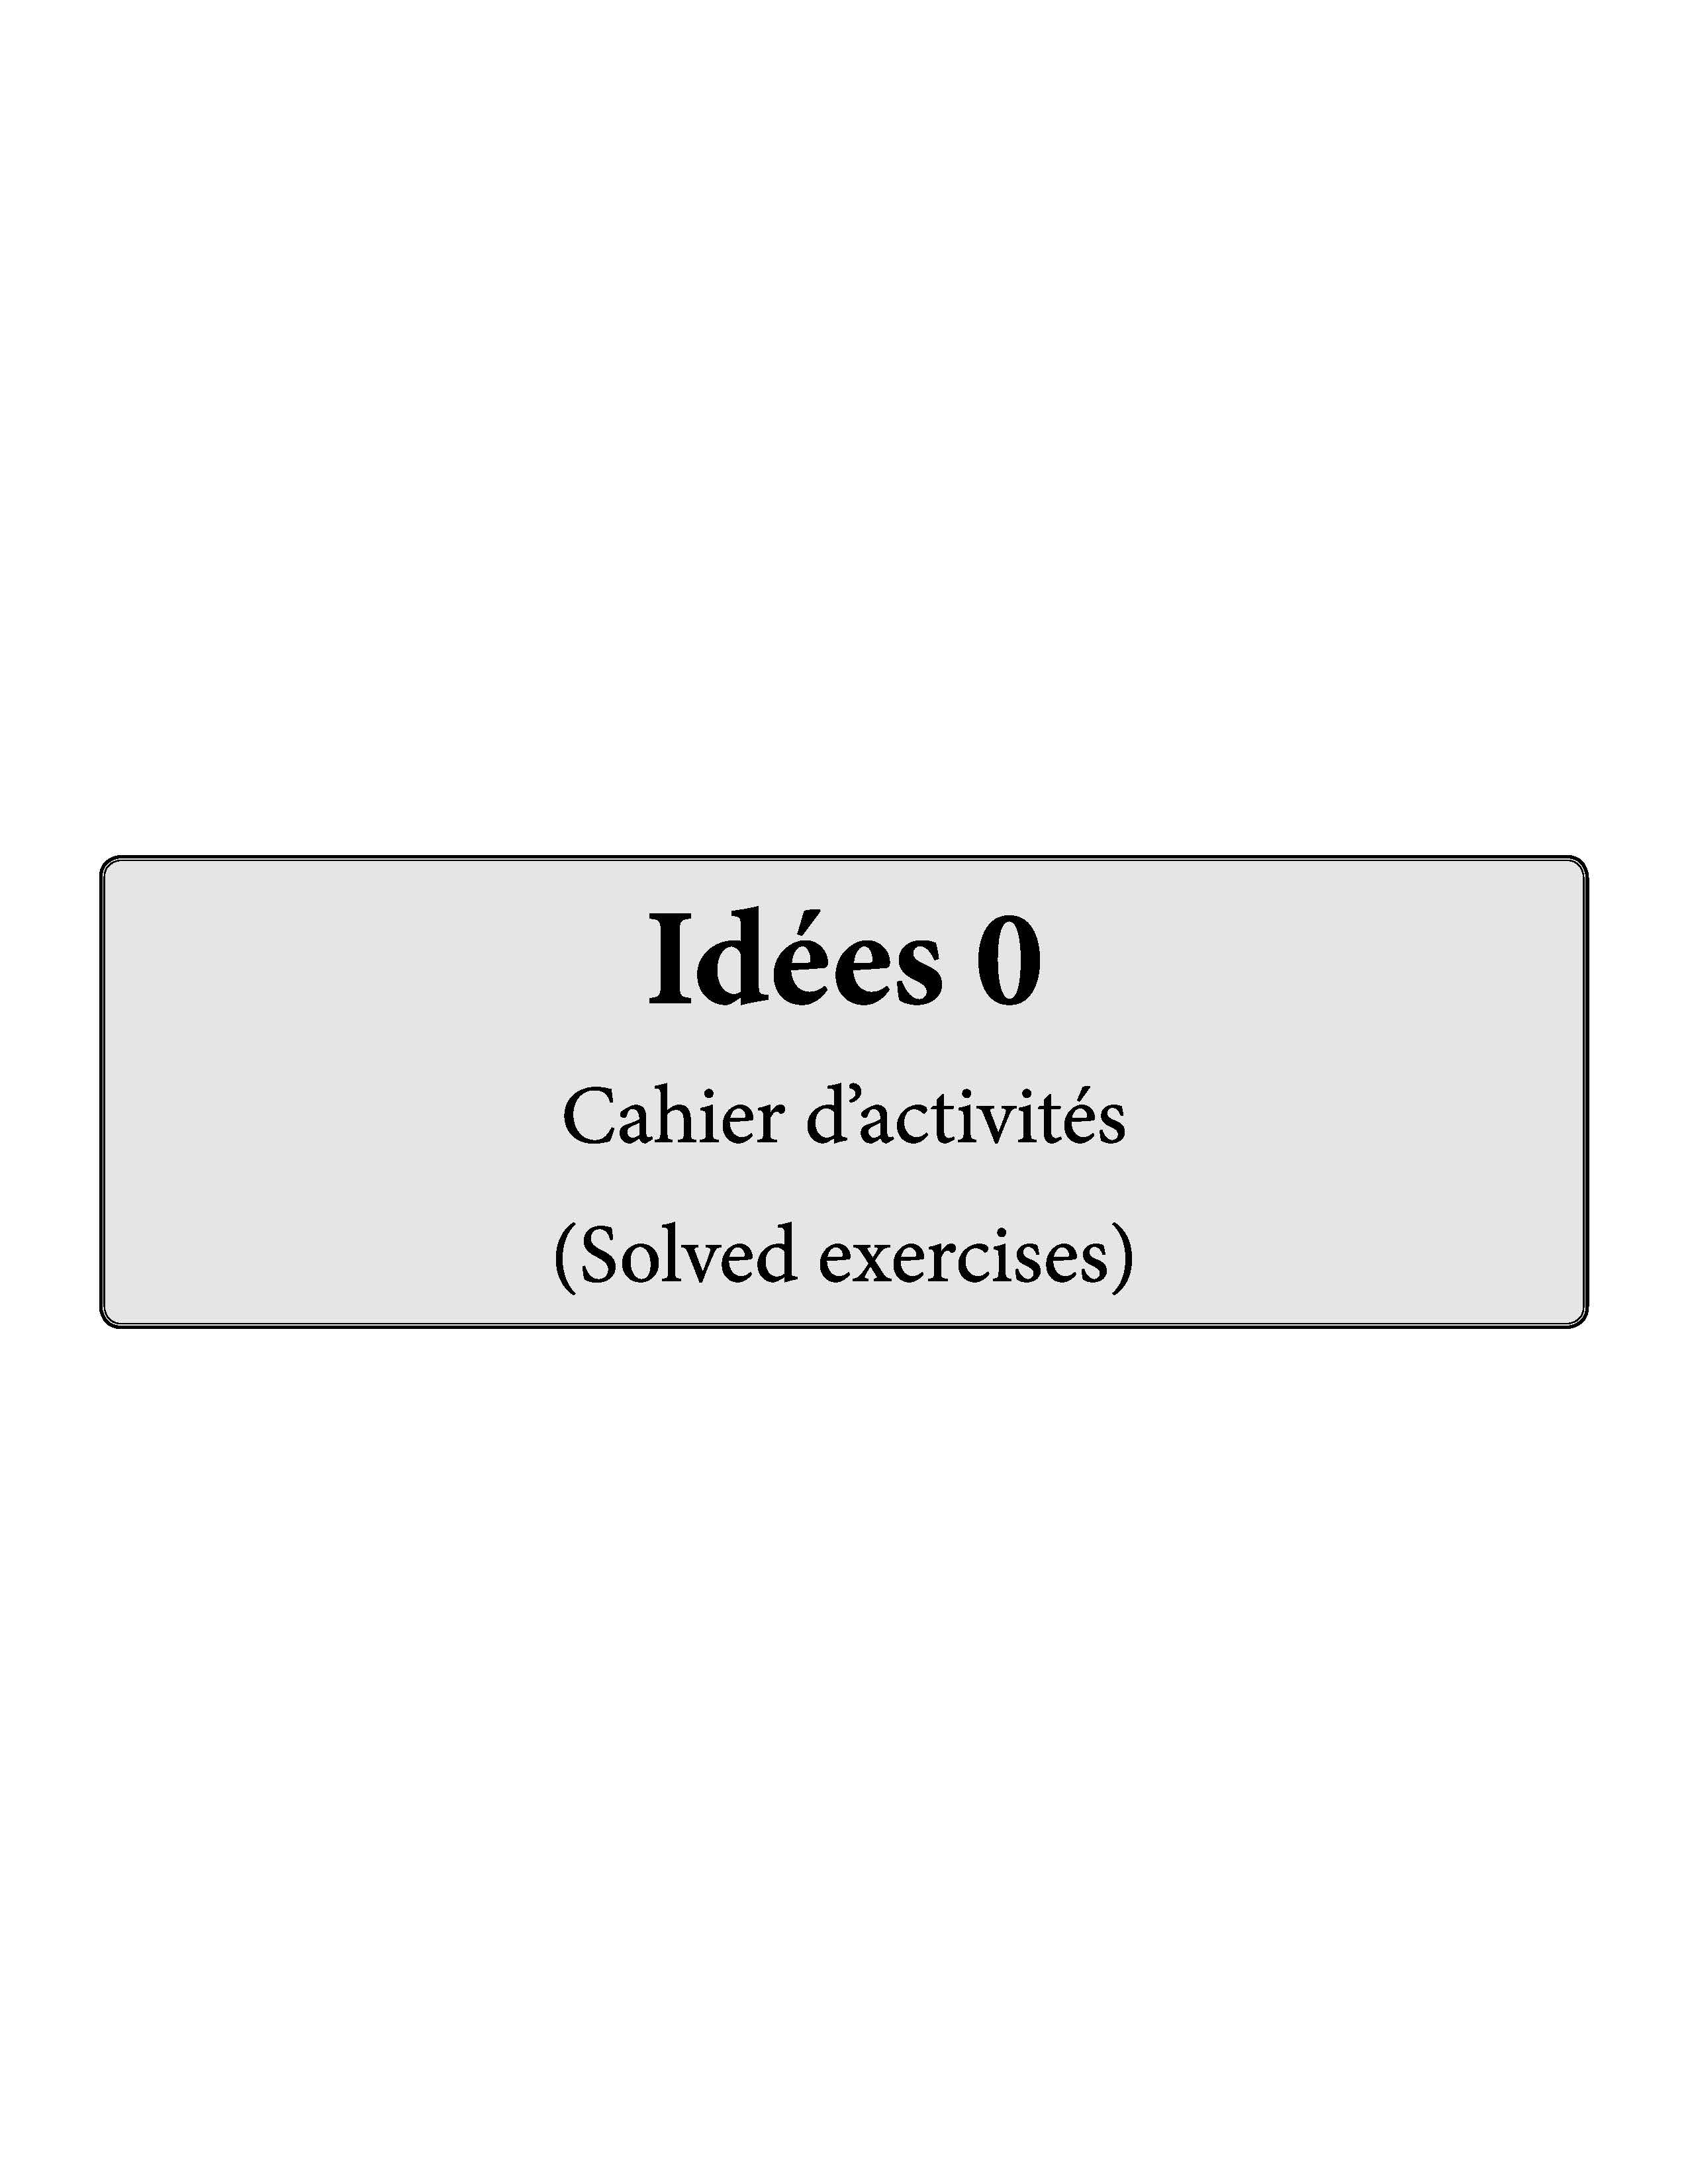 Idées Complete Study Material 0 (For Class 5) Solved Exercises